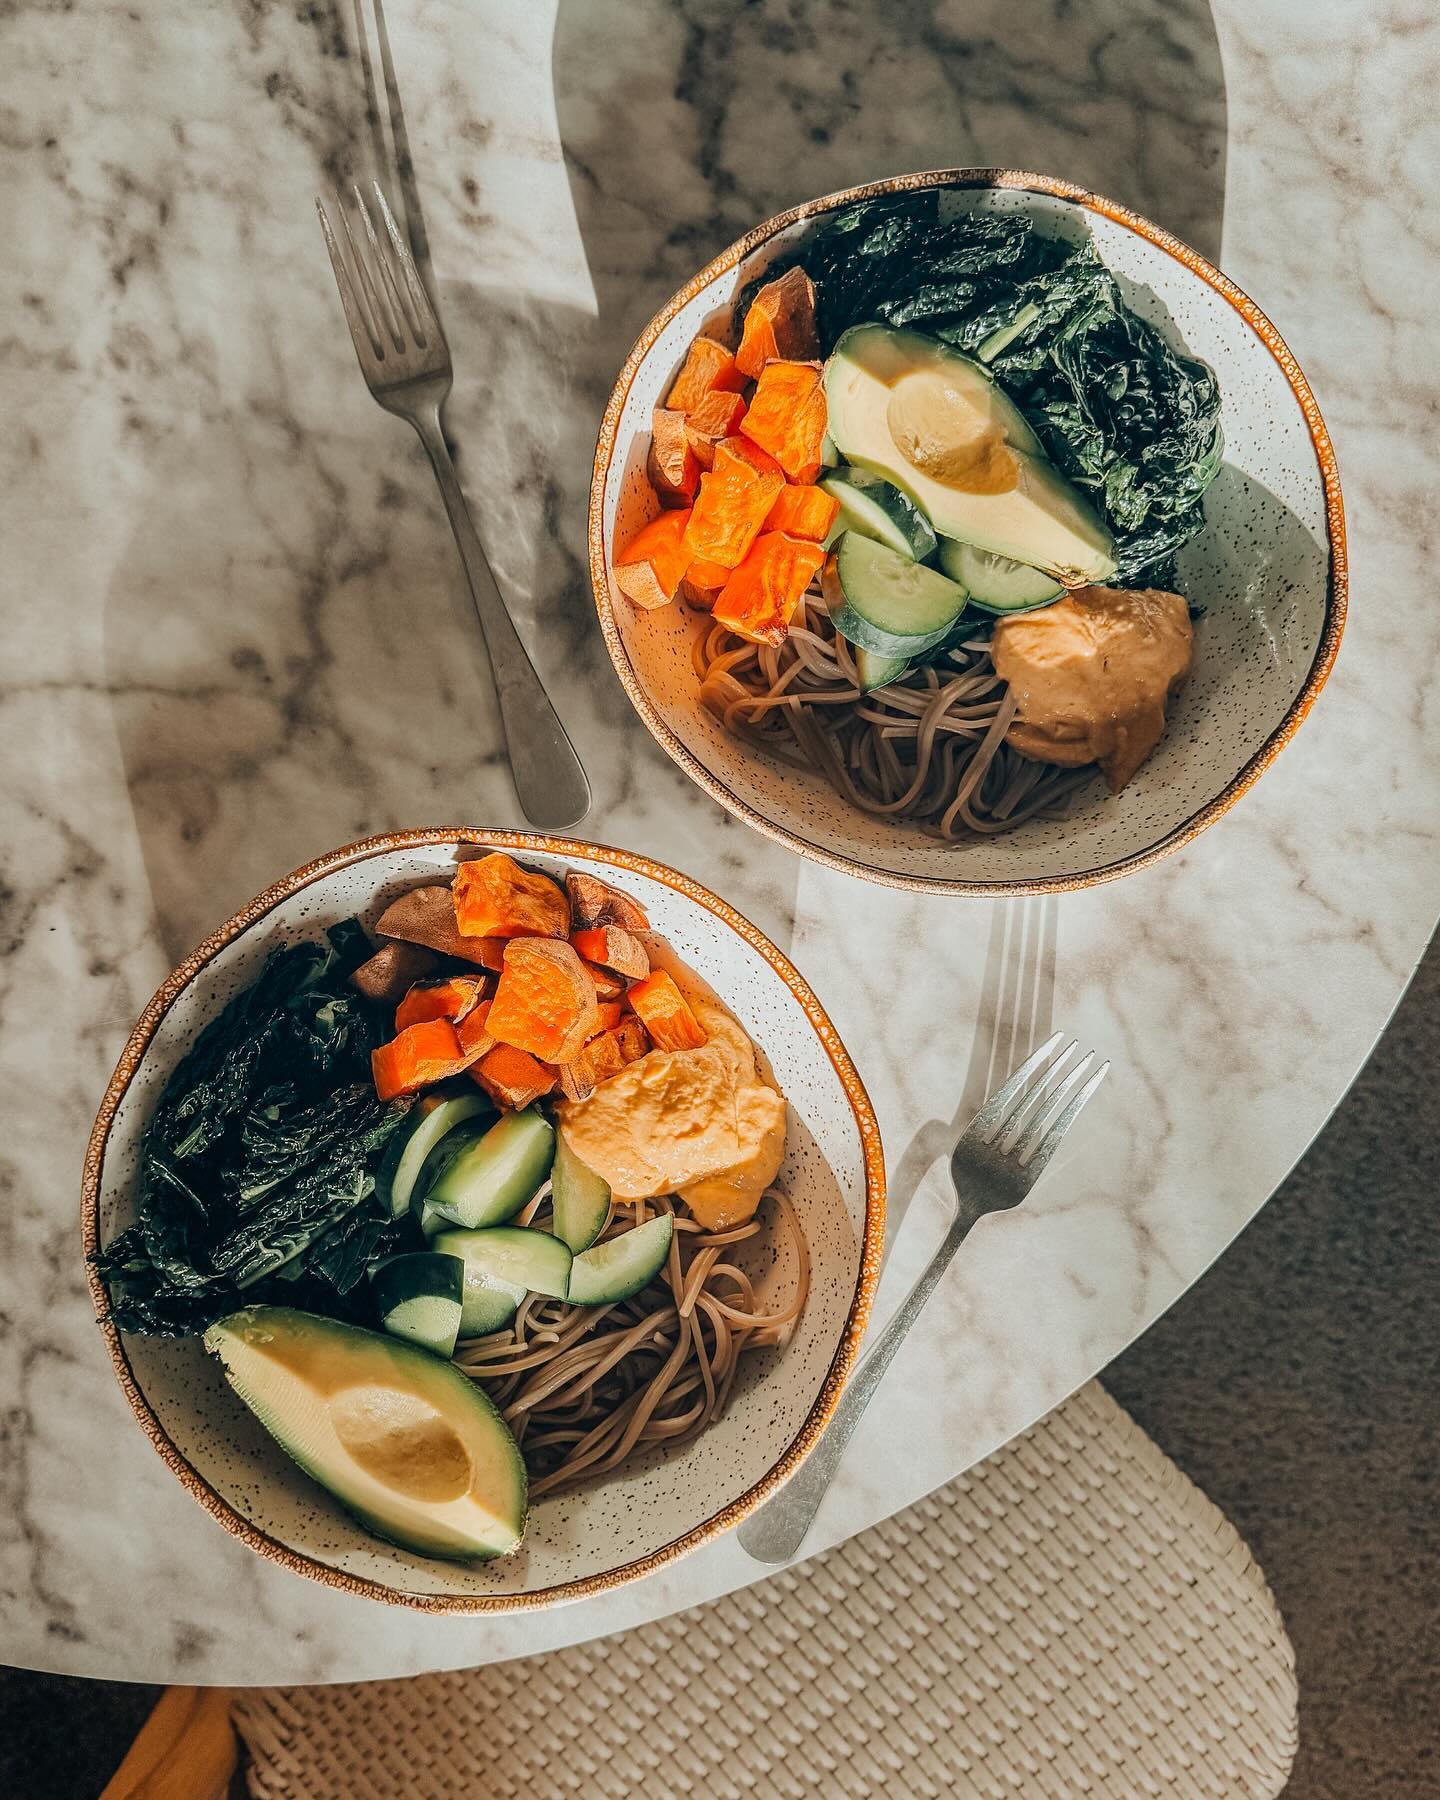 NEW RECIPE: Veggieful Cold Noodle Bowl with a Mango Peanut Sauce 

The days are coming where something quick and refreshing is all you&rsquo;re going to be looking for. These cold noodle bowls are flexible enough that you can throw them together with